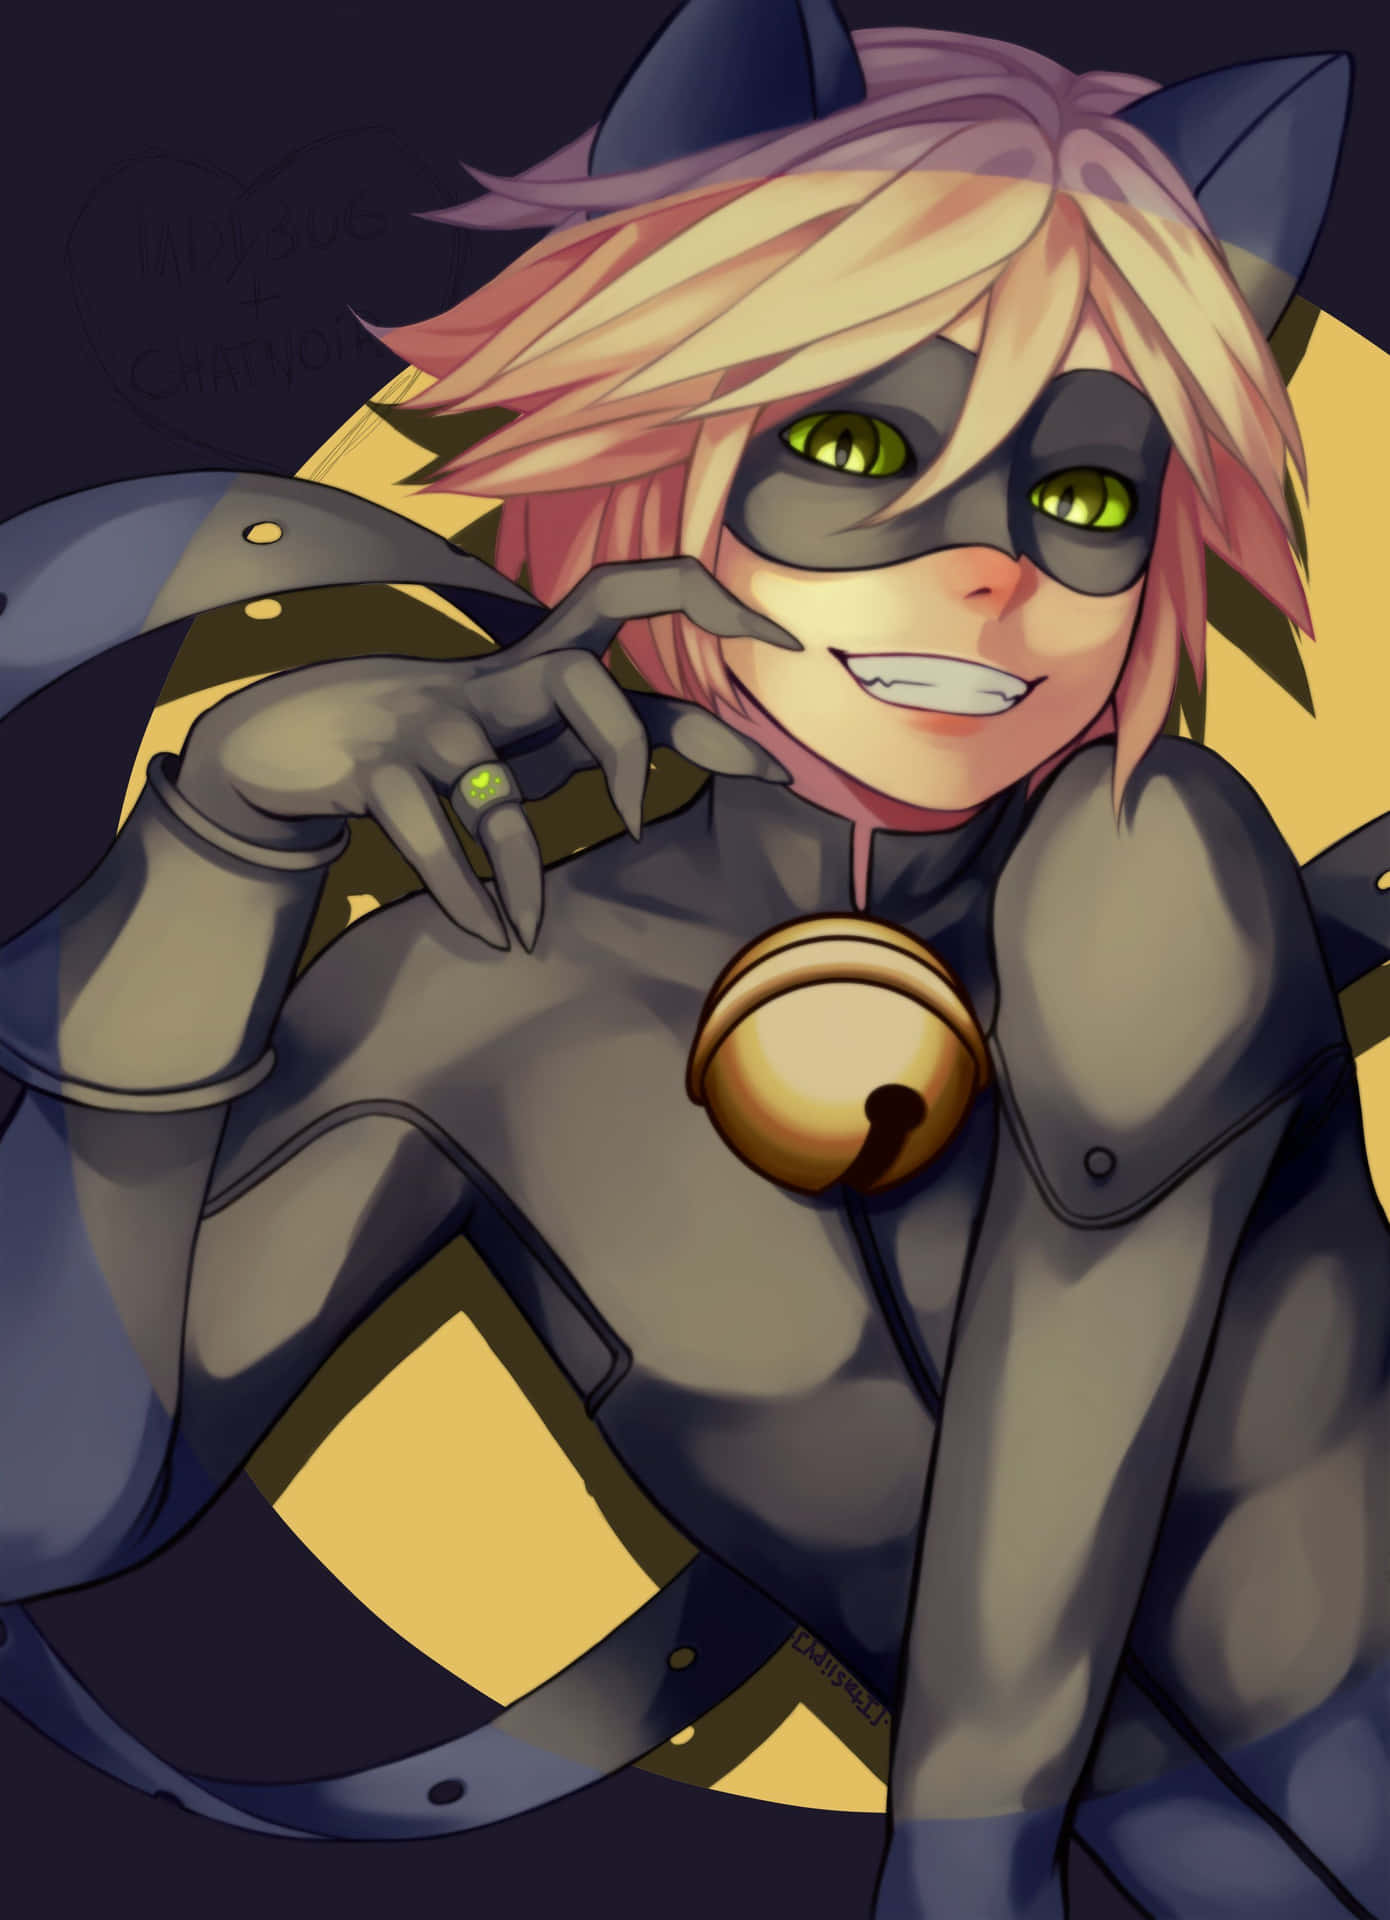 "Be curious and secretly explore the darkness with Chat Noir." Wallpaper